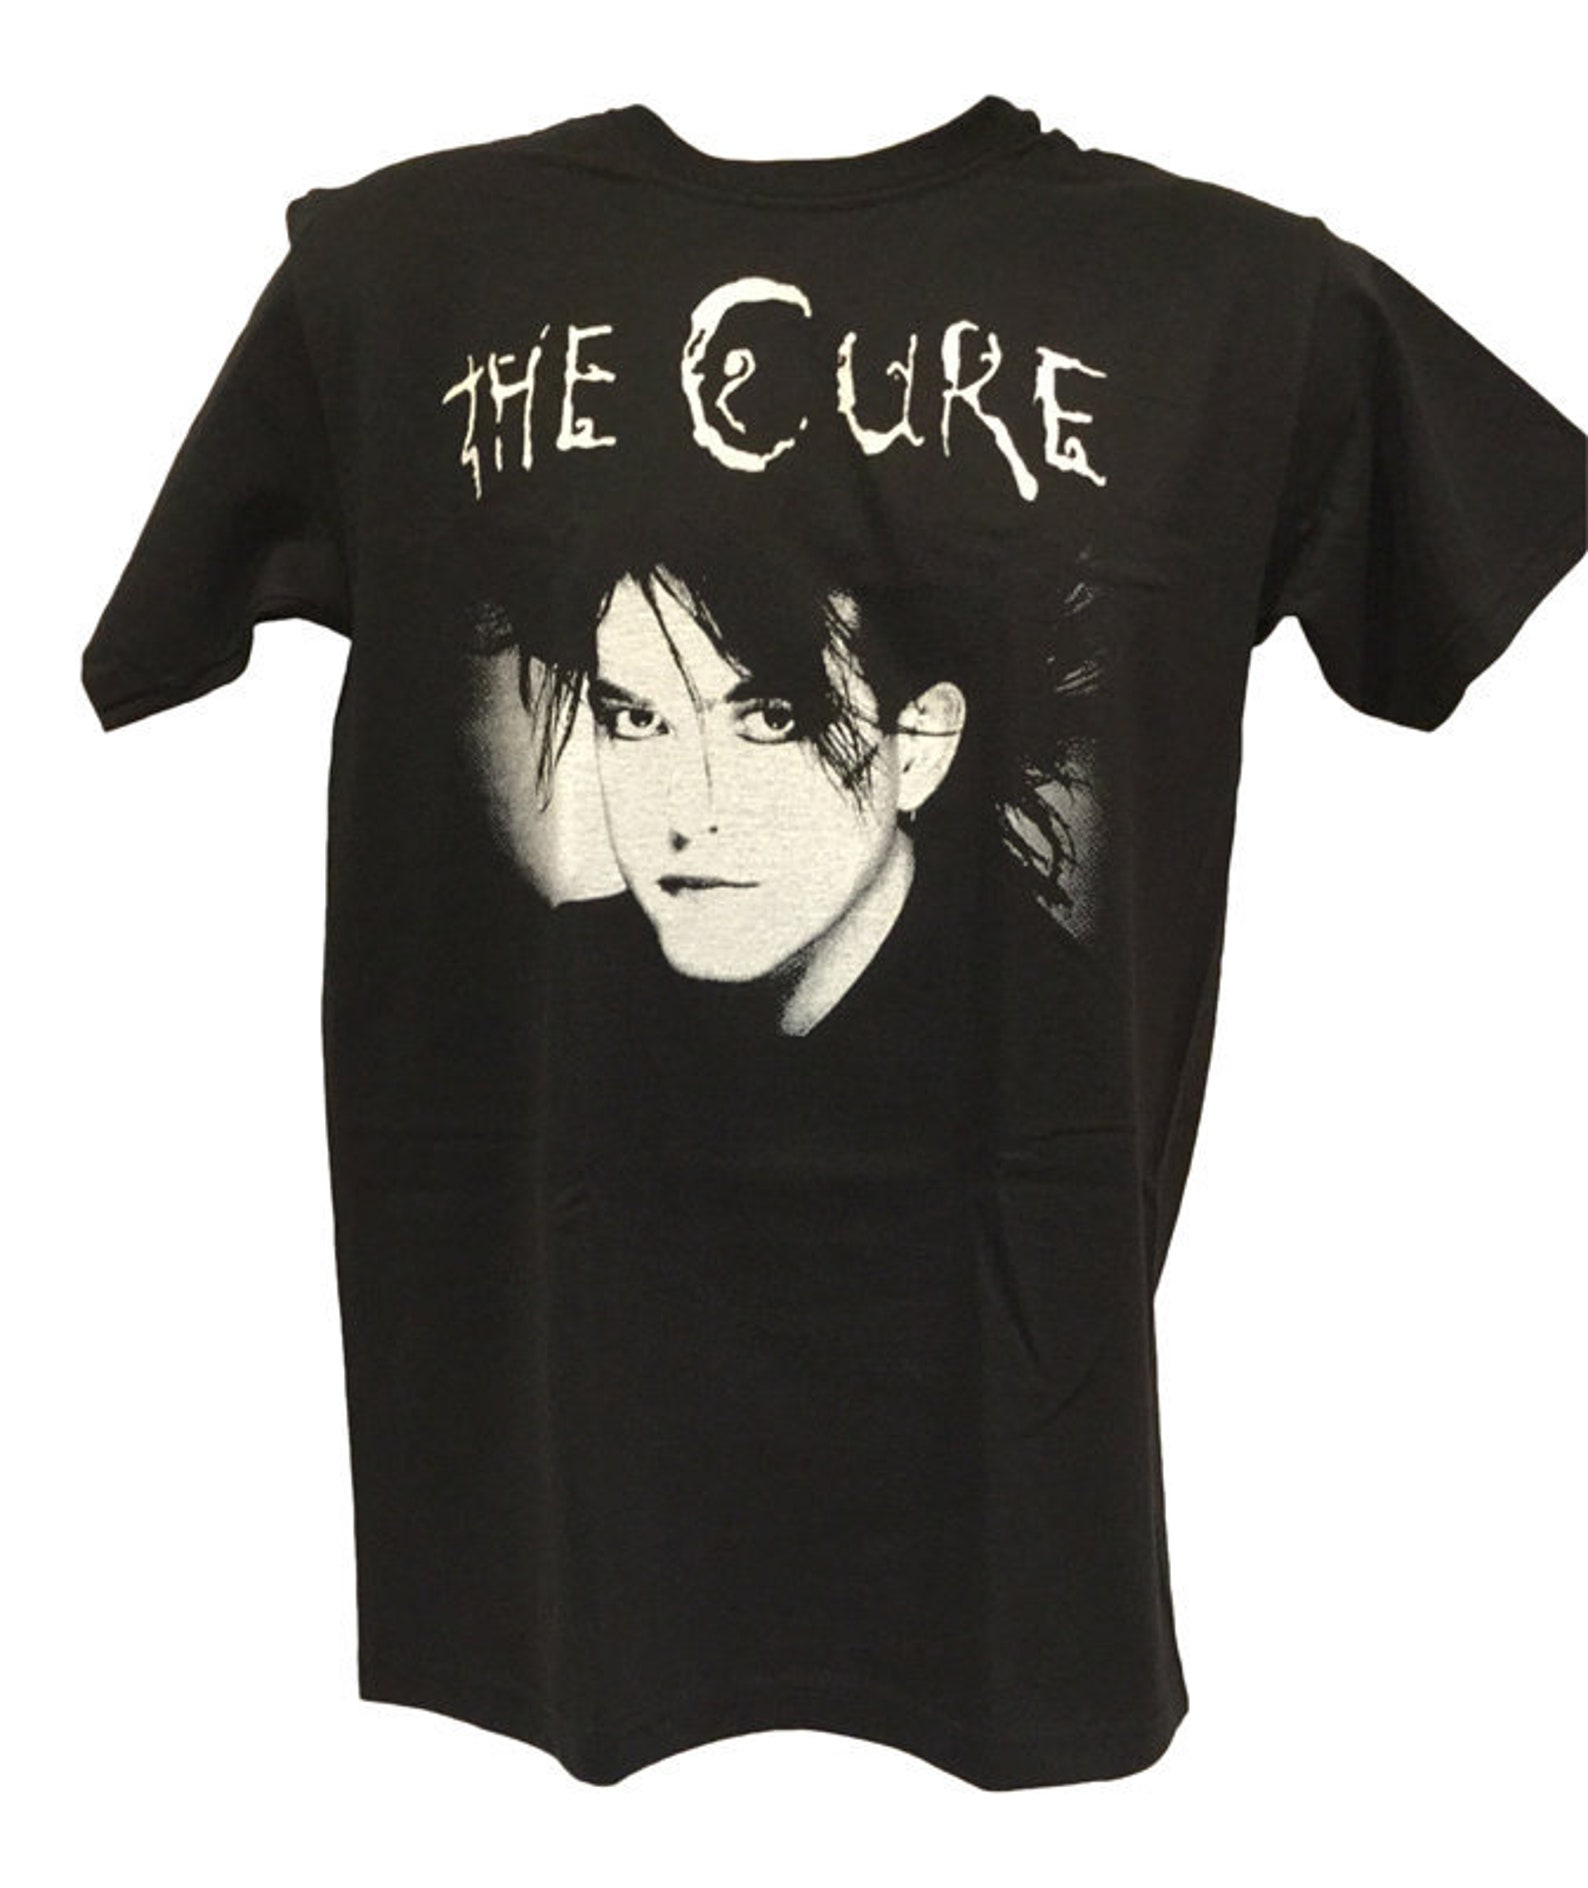 THE CURE T SHIRT Etsy